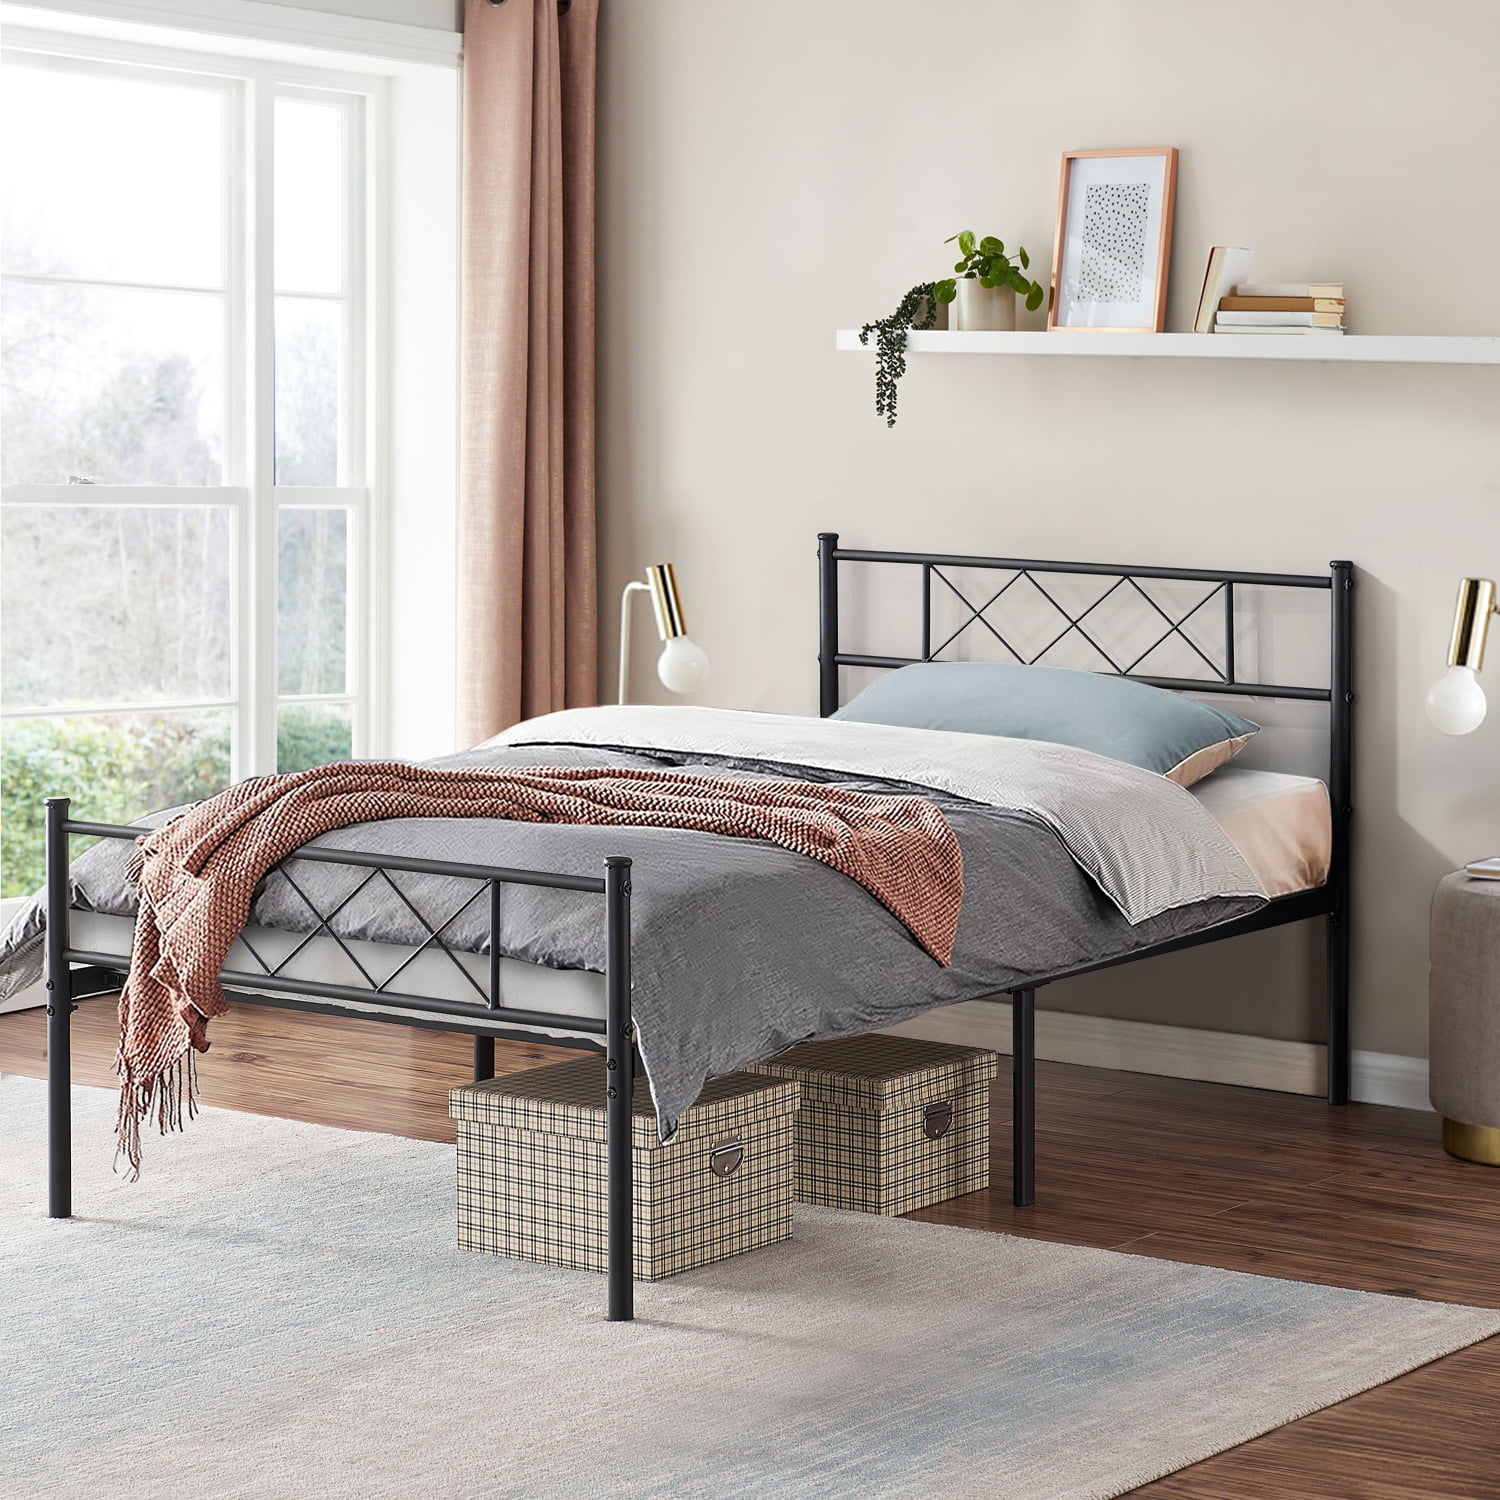 Twin Size Metal Platform Bed Frame With, How To Put Together A Bed Frame And Headboard